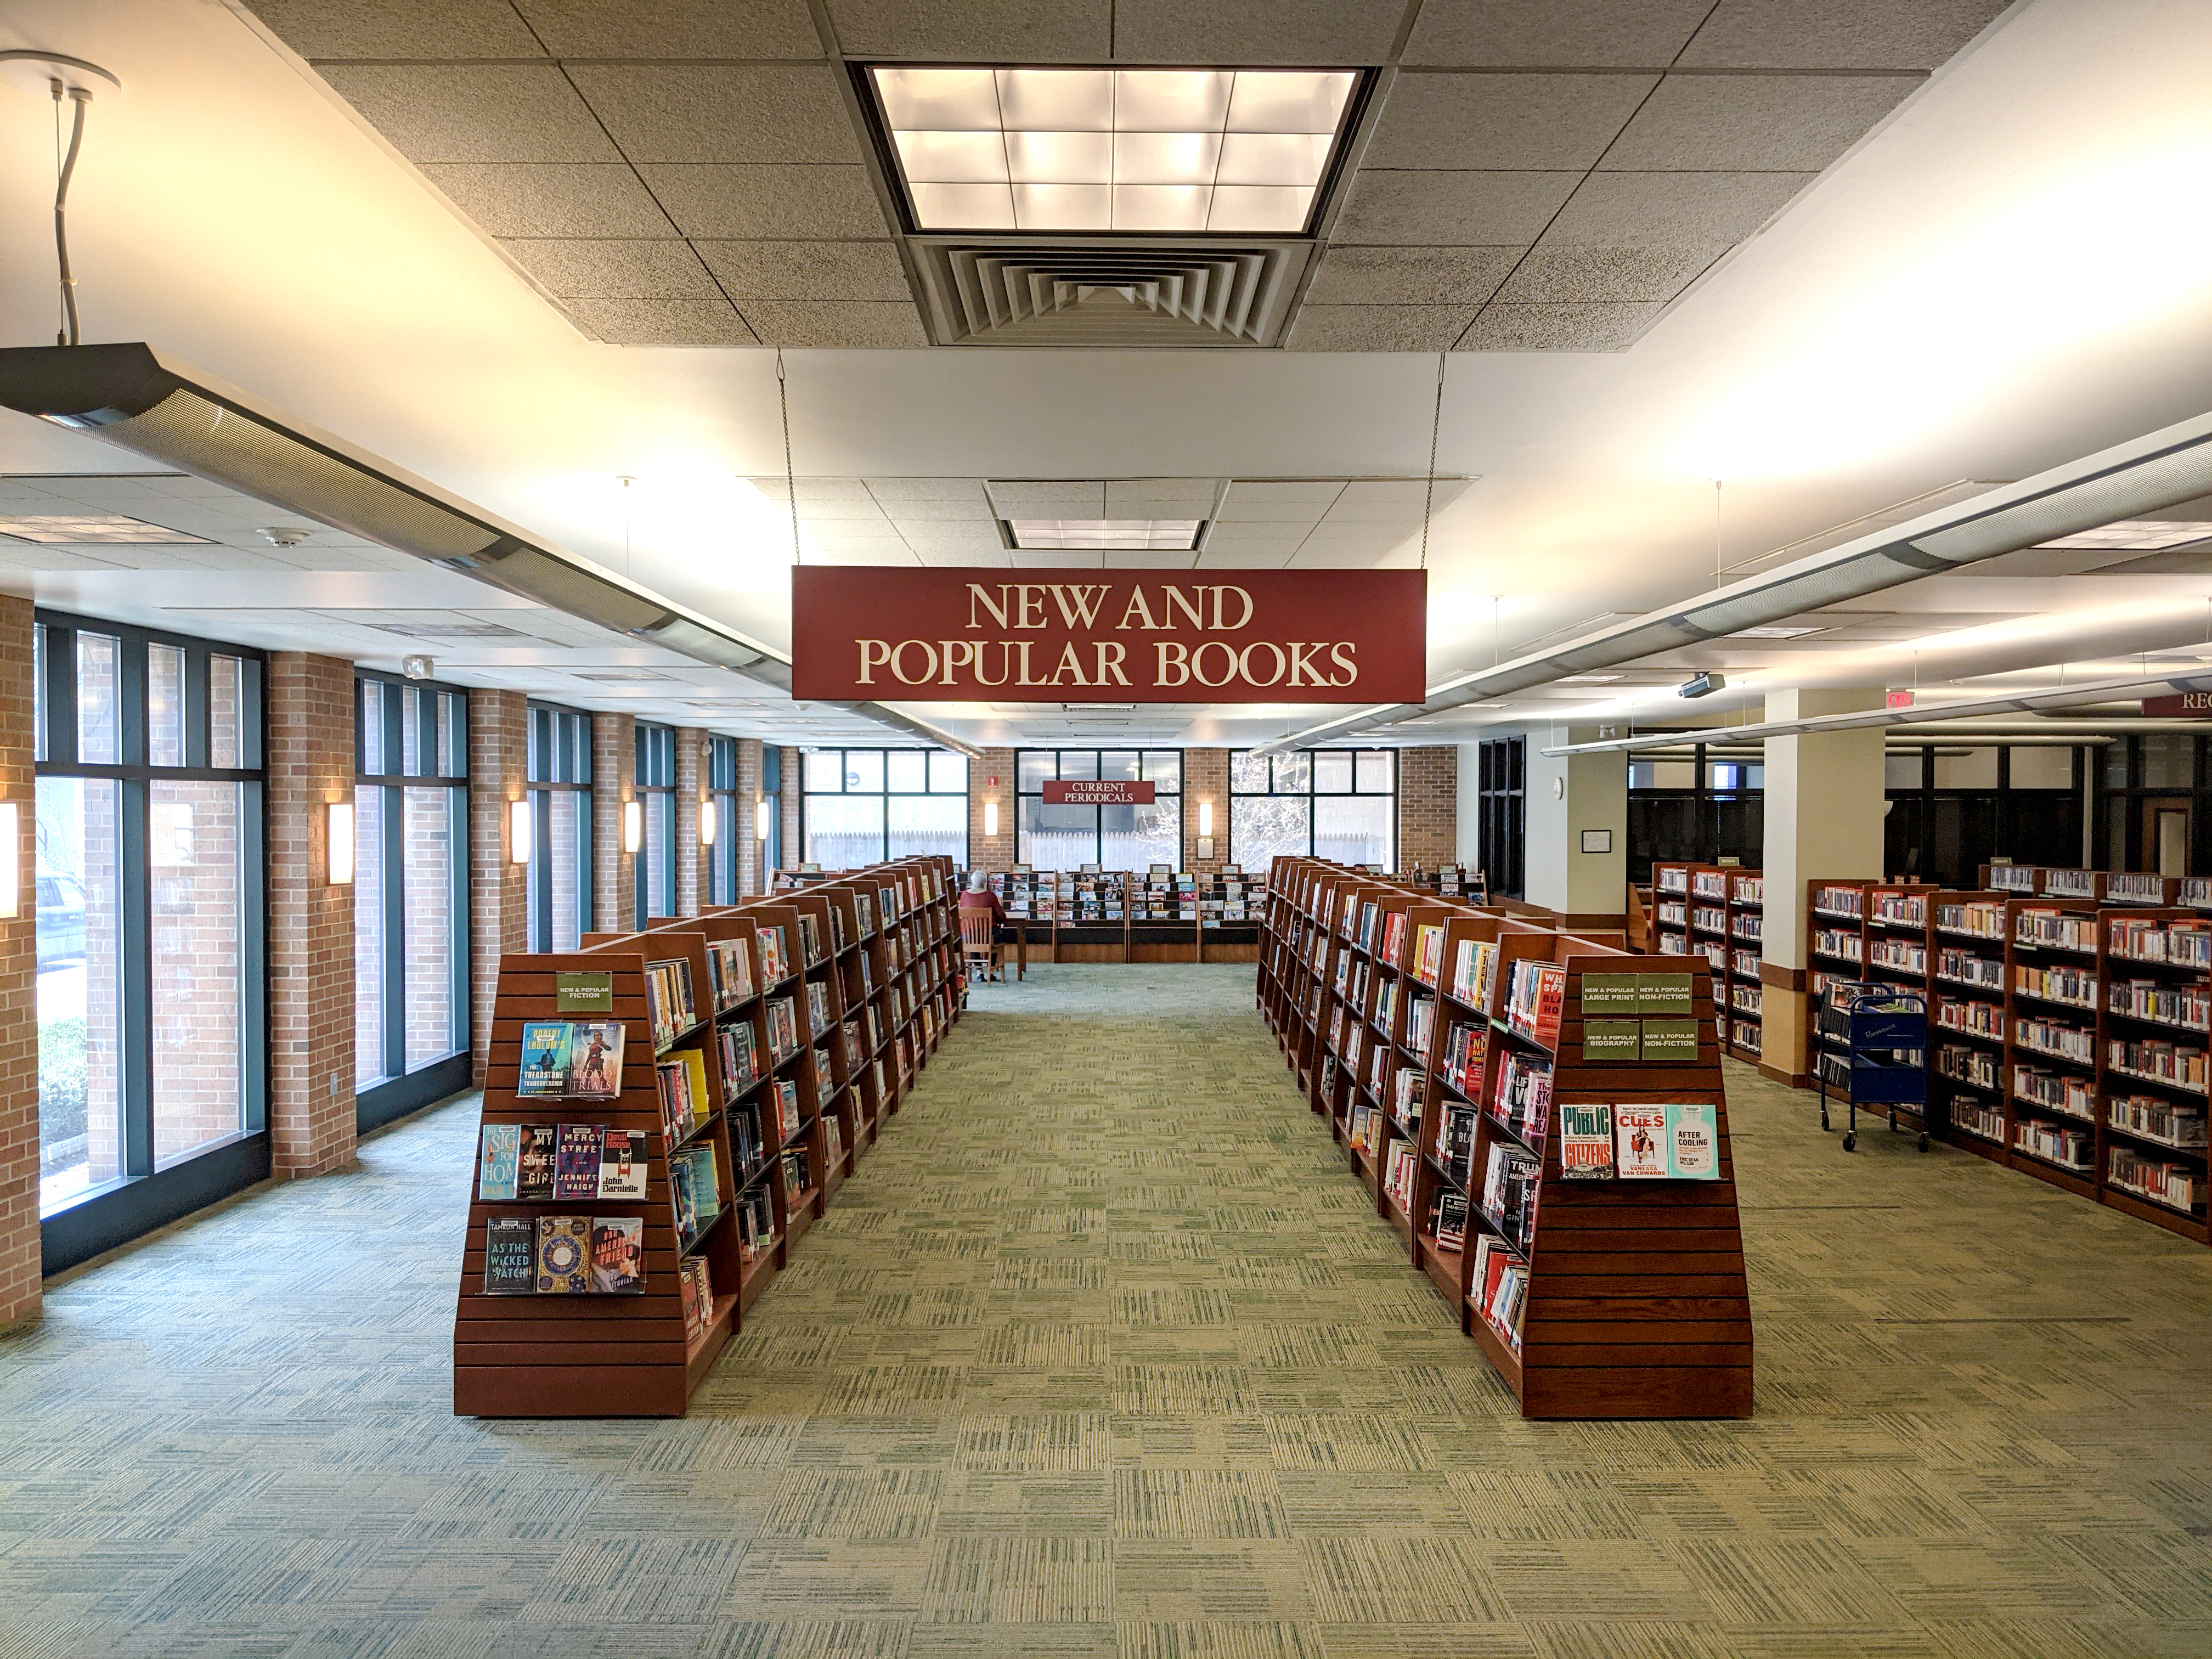 Shelves full of books create a walkway straight forward with a sign above displaying New and Popular Books.